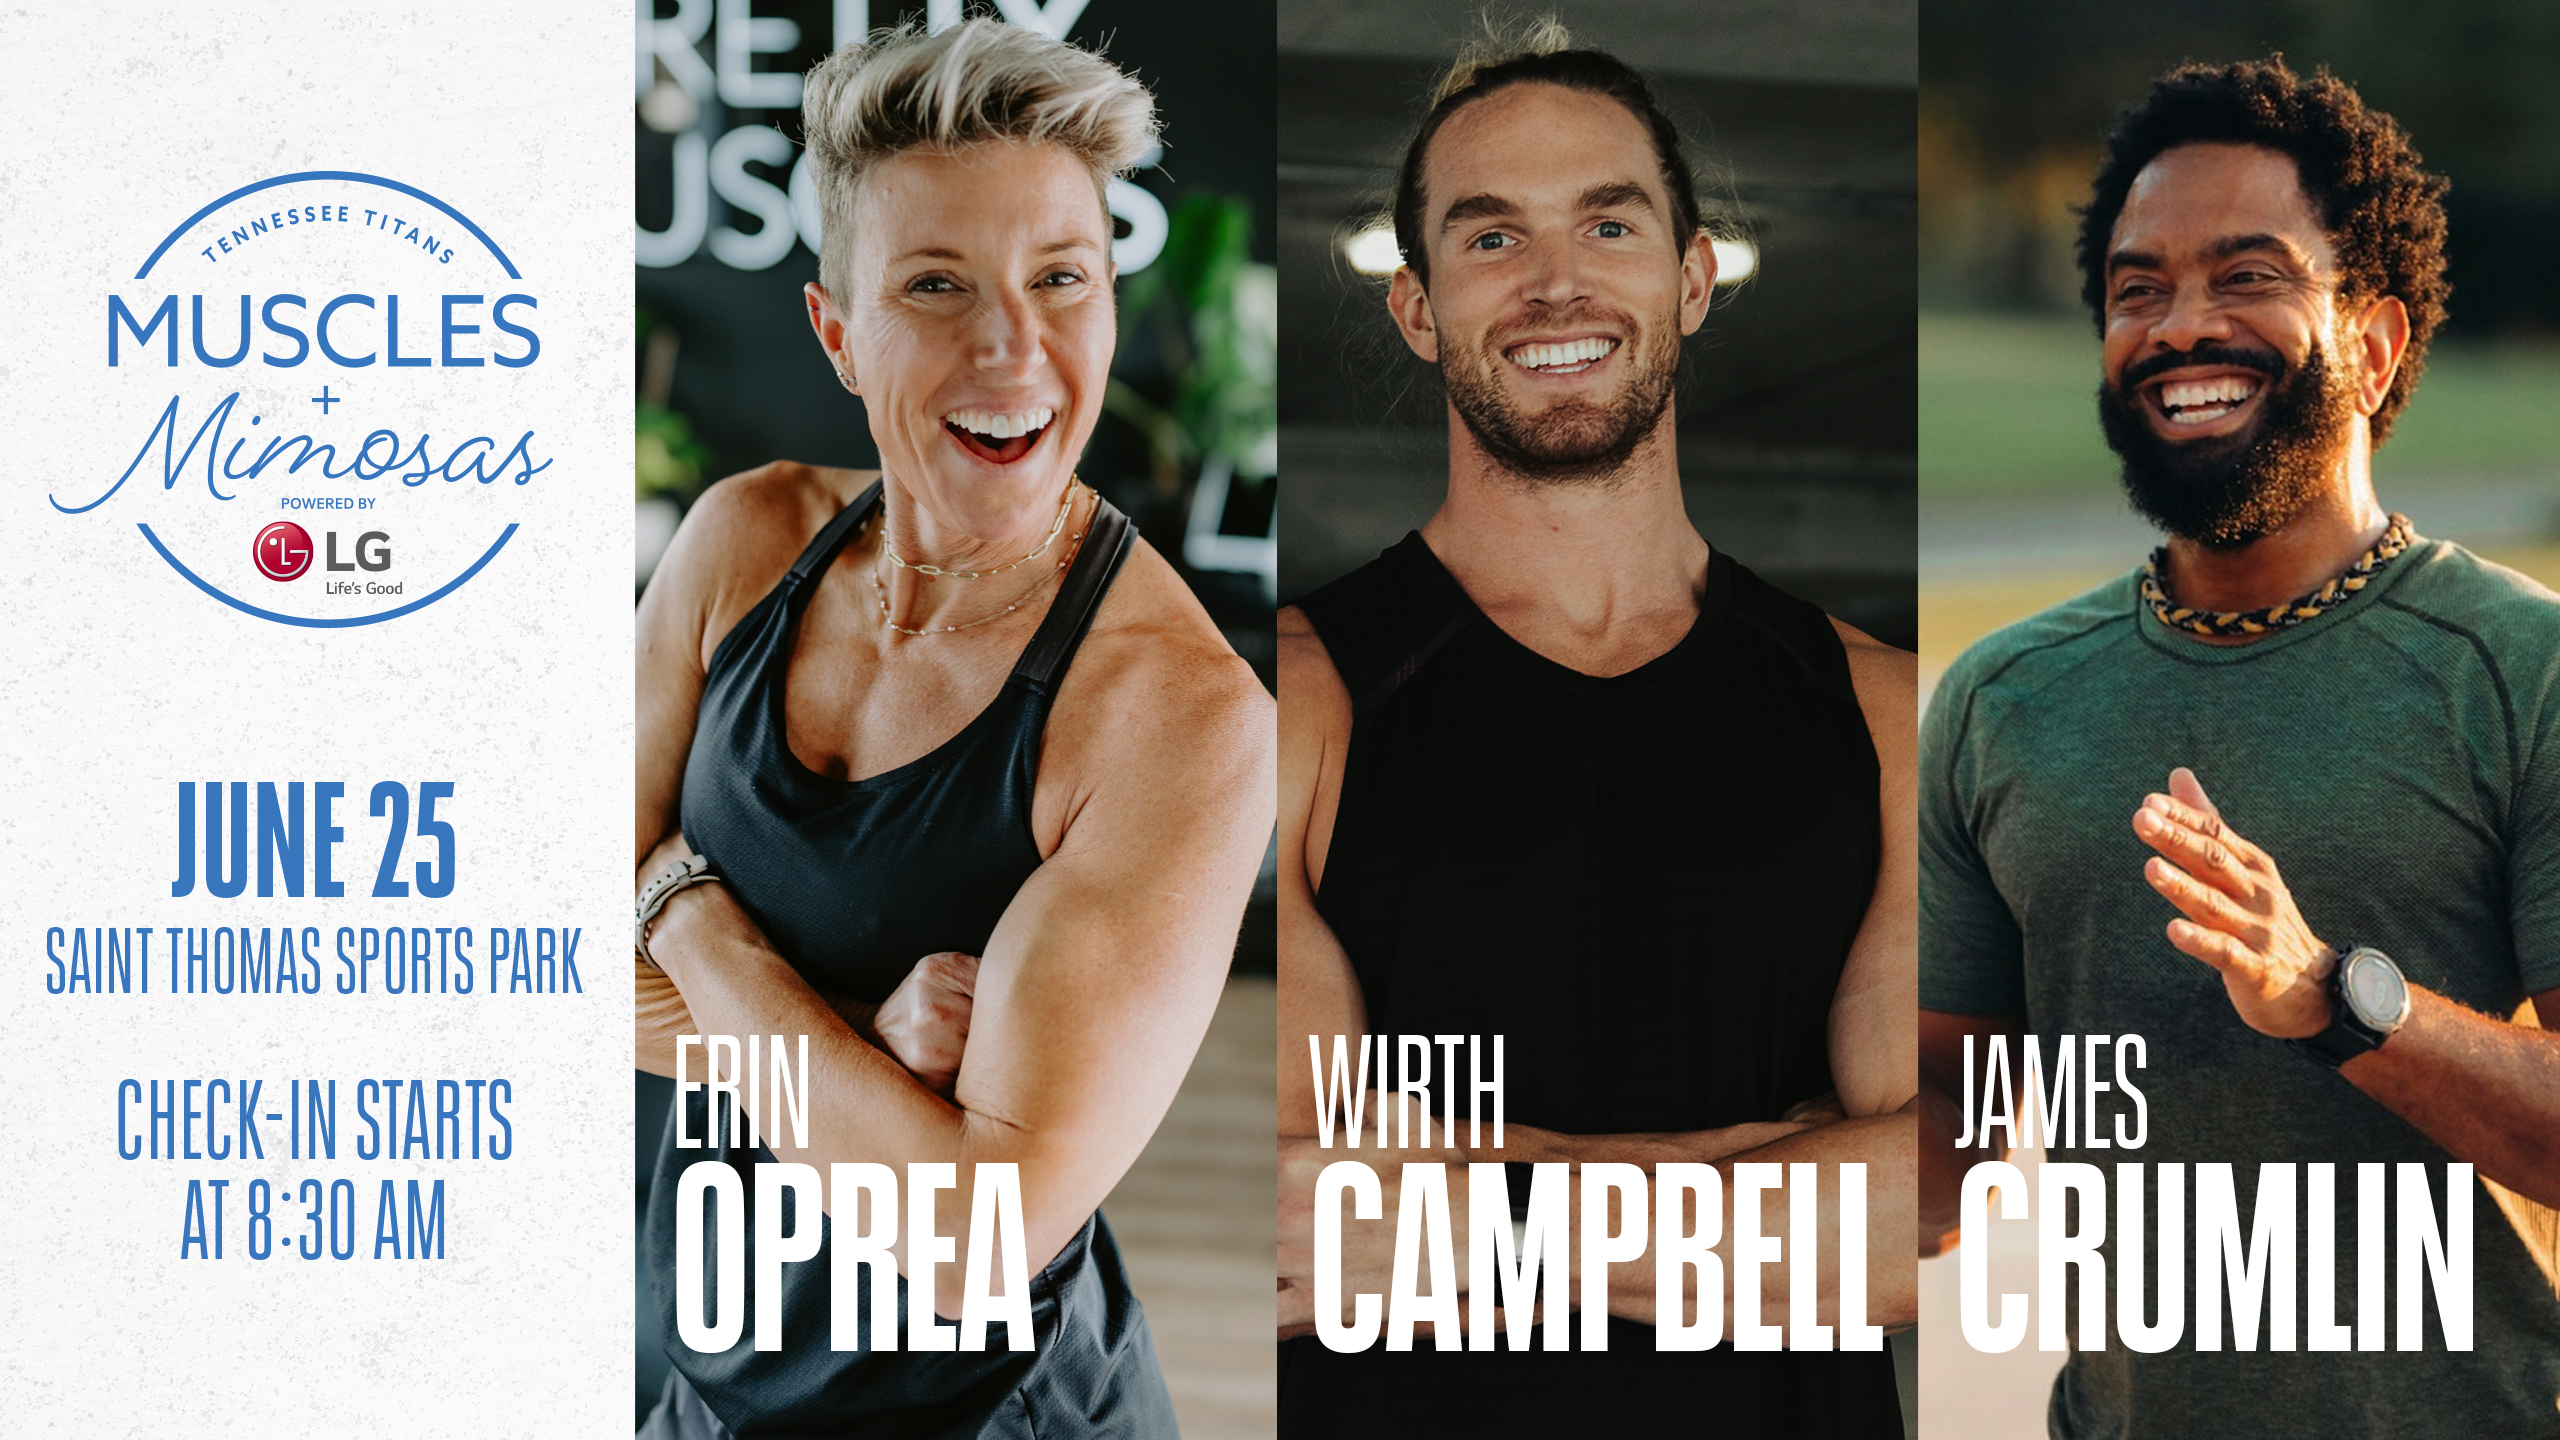 Tennessee Titans To Host Muscles & Mimosas Event With Celebrity Trainer Erin  Oprea - The Sports Credential